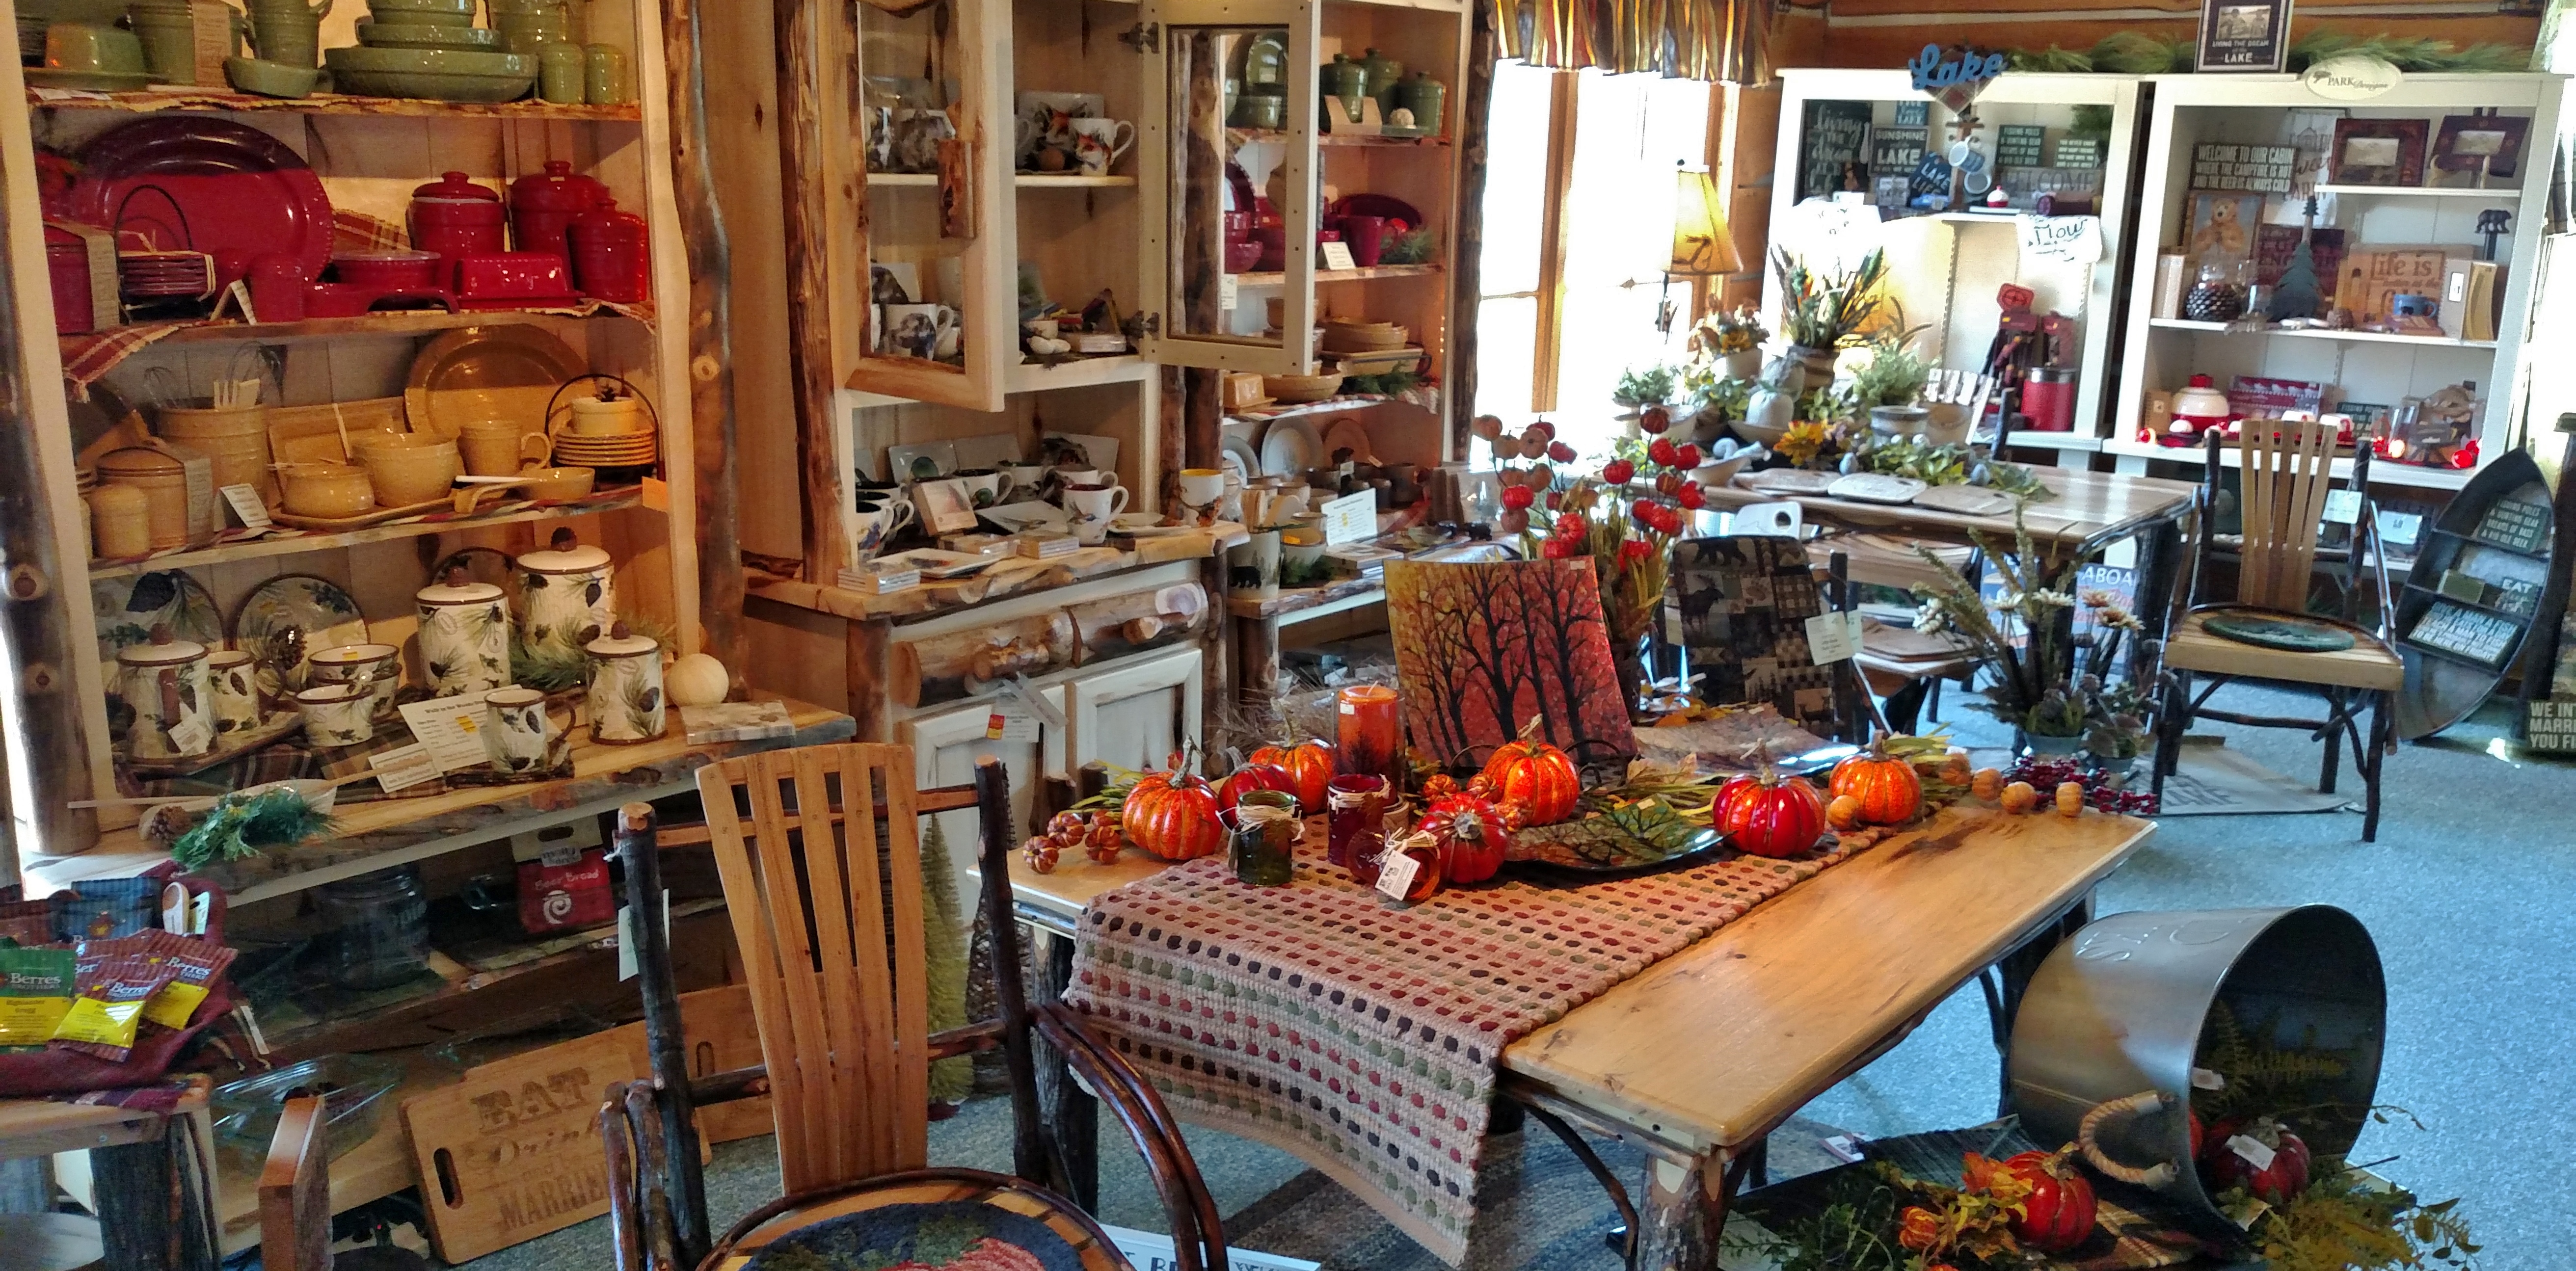 4 Cabin Decor Shops in Northern Wisconsin You Need to Visit – Up